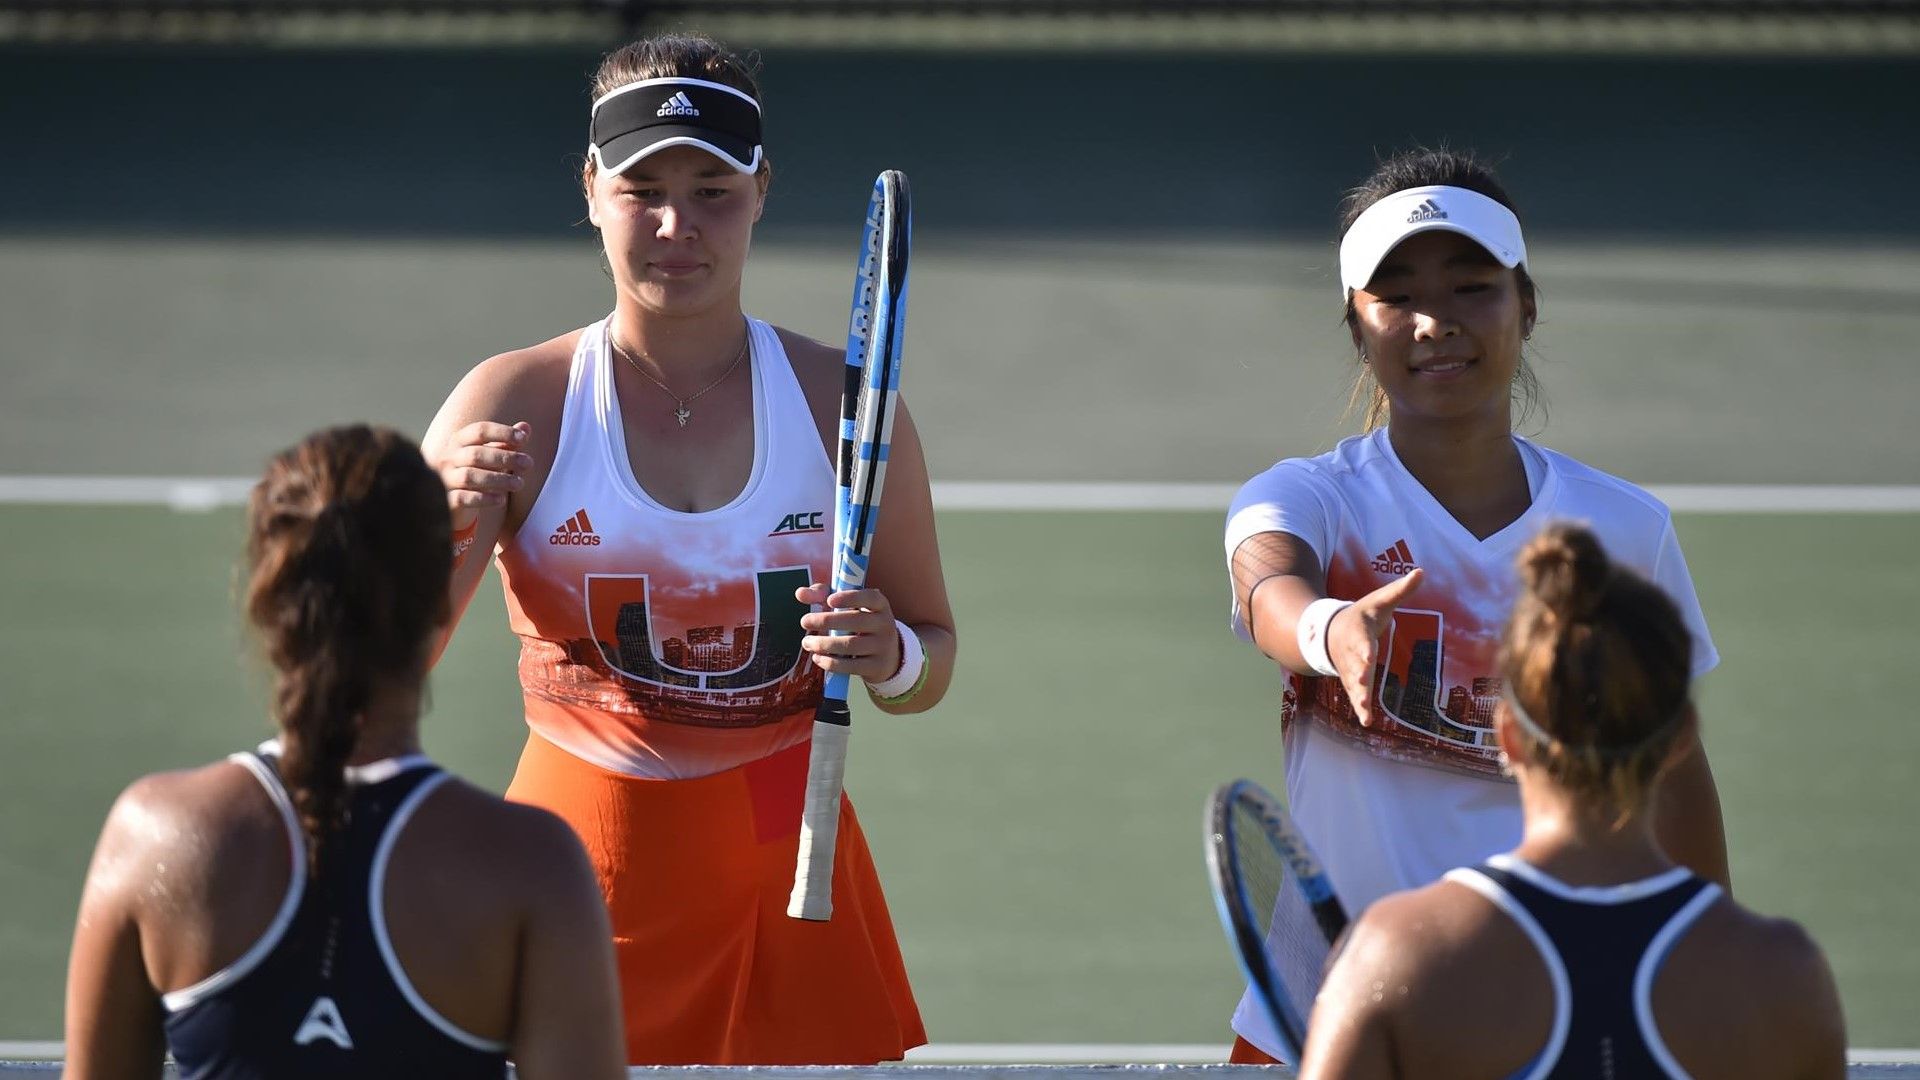 Three Canes Reach Bedford Cup Main Draw Finales